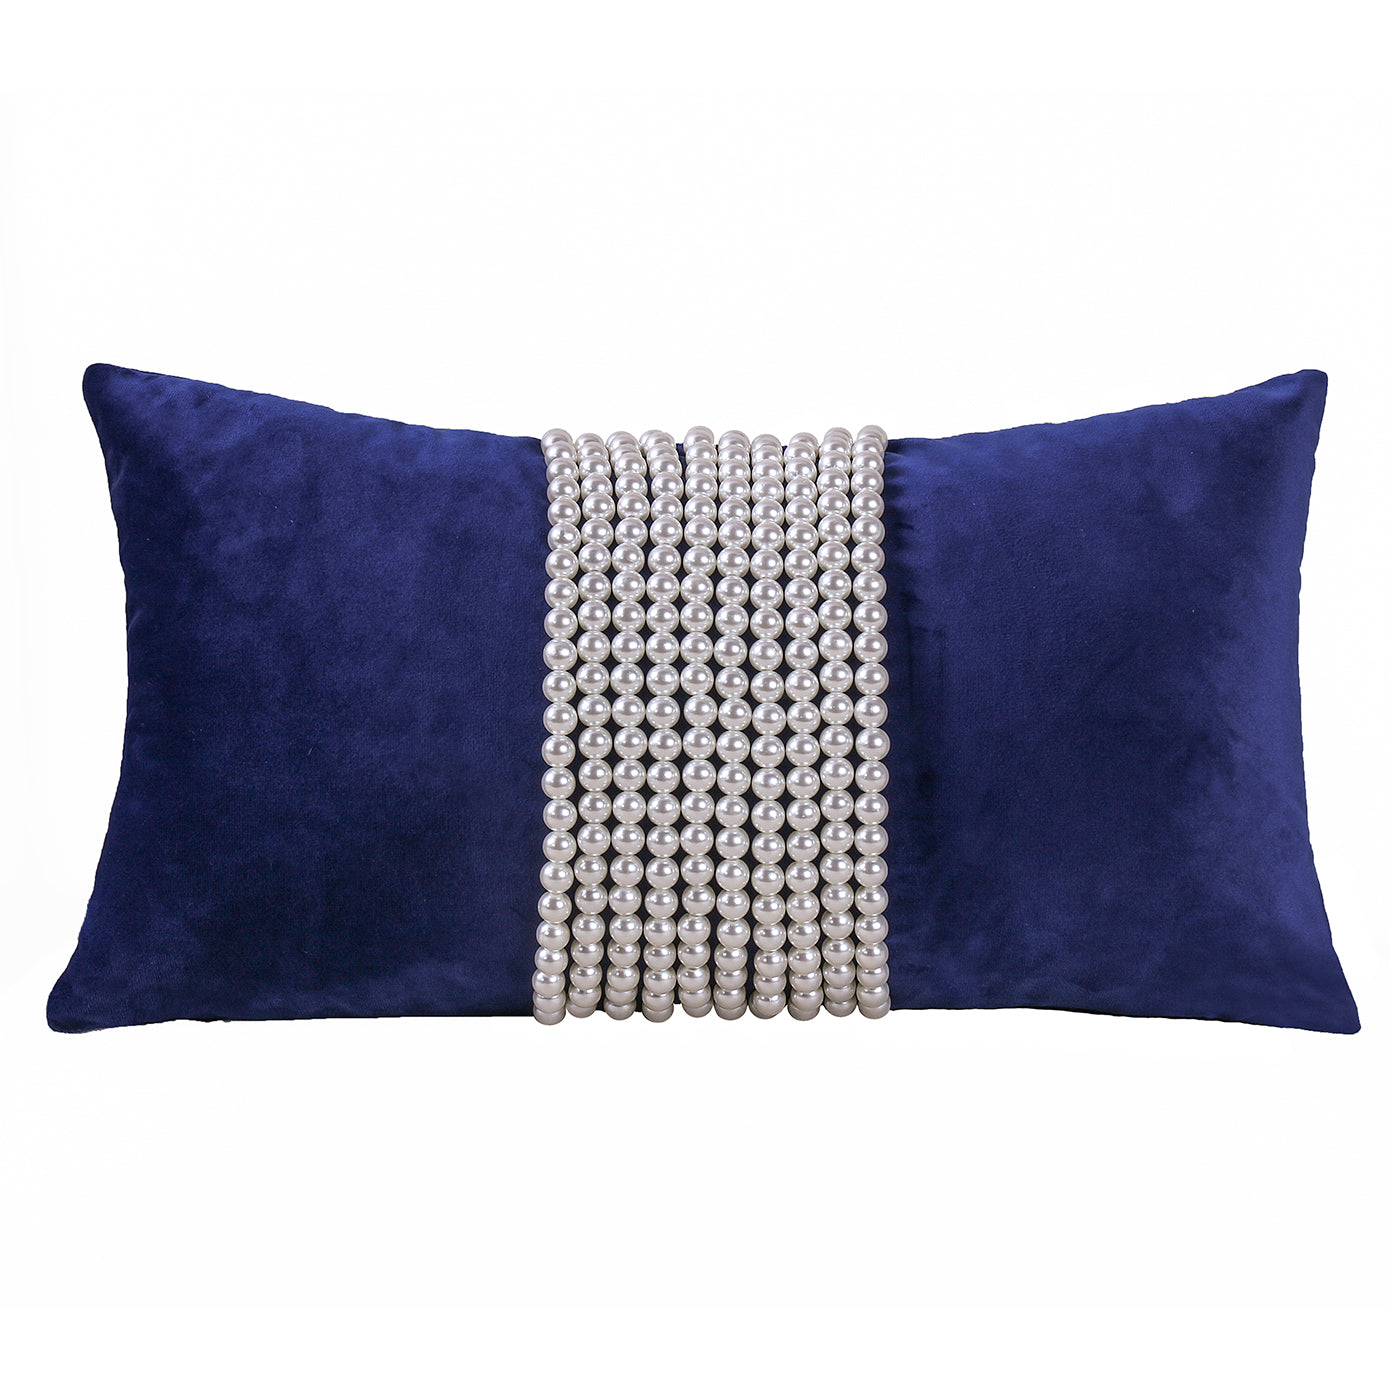 Decorative  pillow with pearl Strip or pearlTassels, Blue